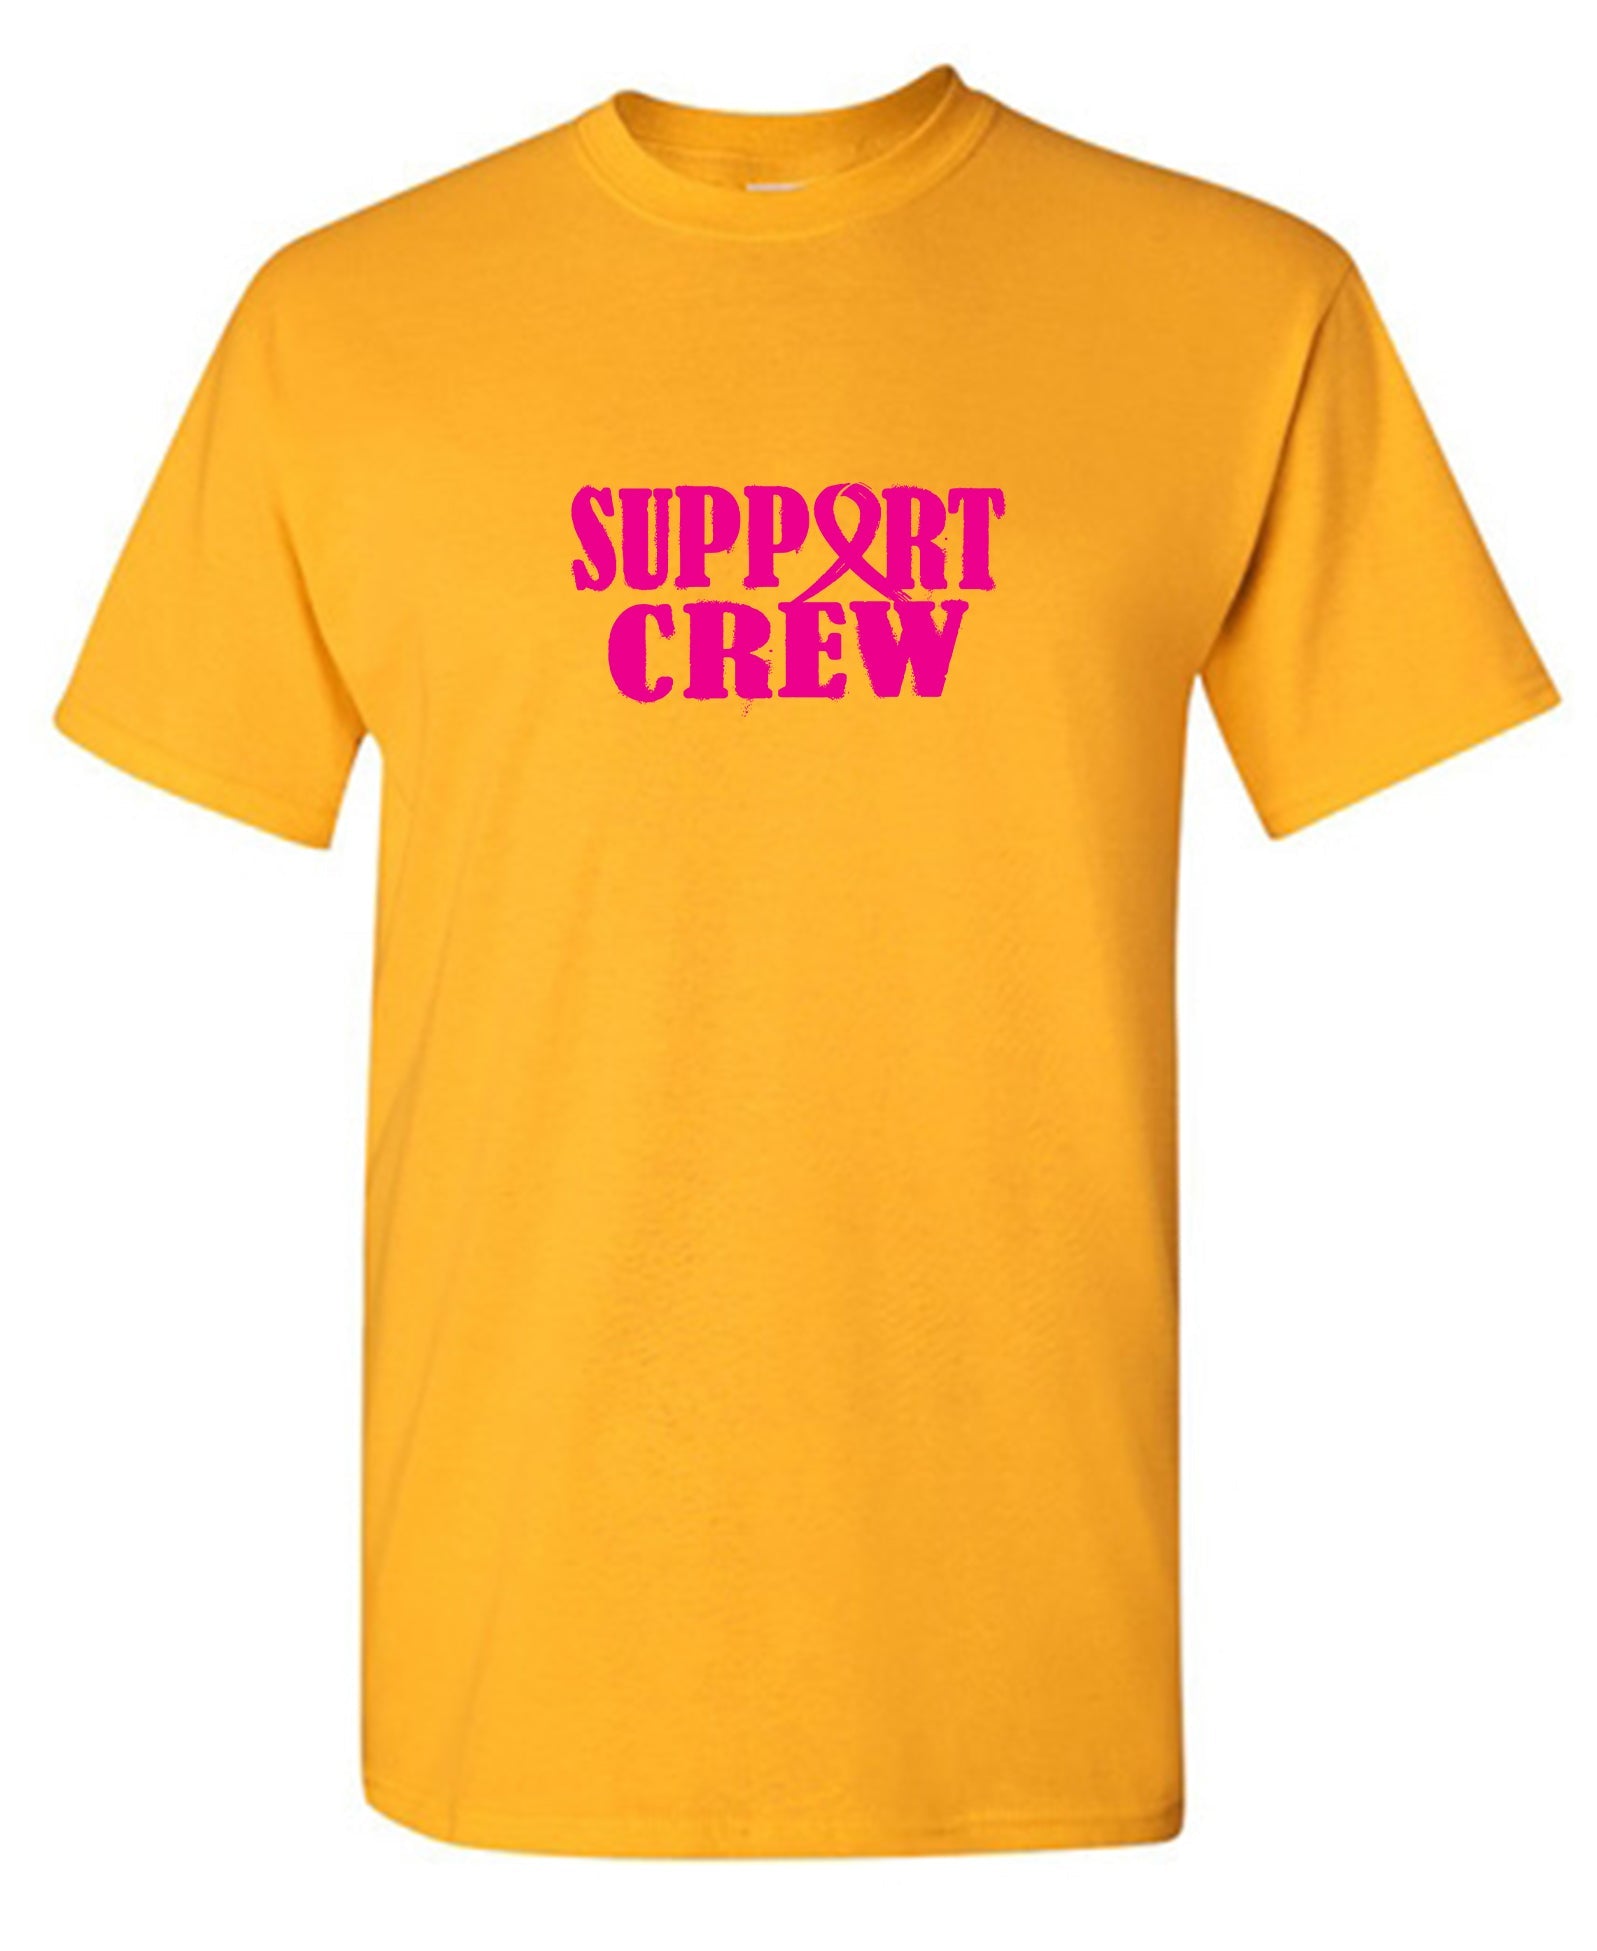 Support Crew Tee - Funny Graphic T Shirts